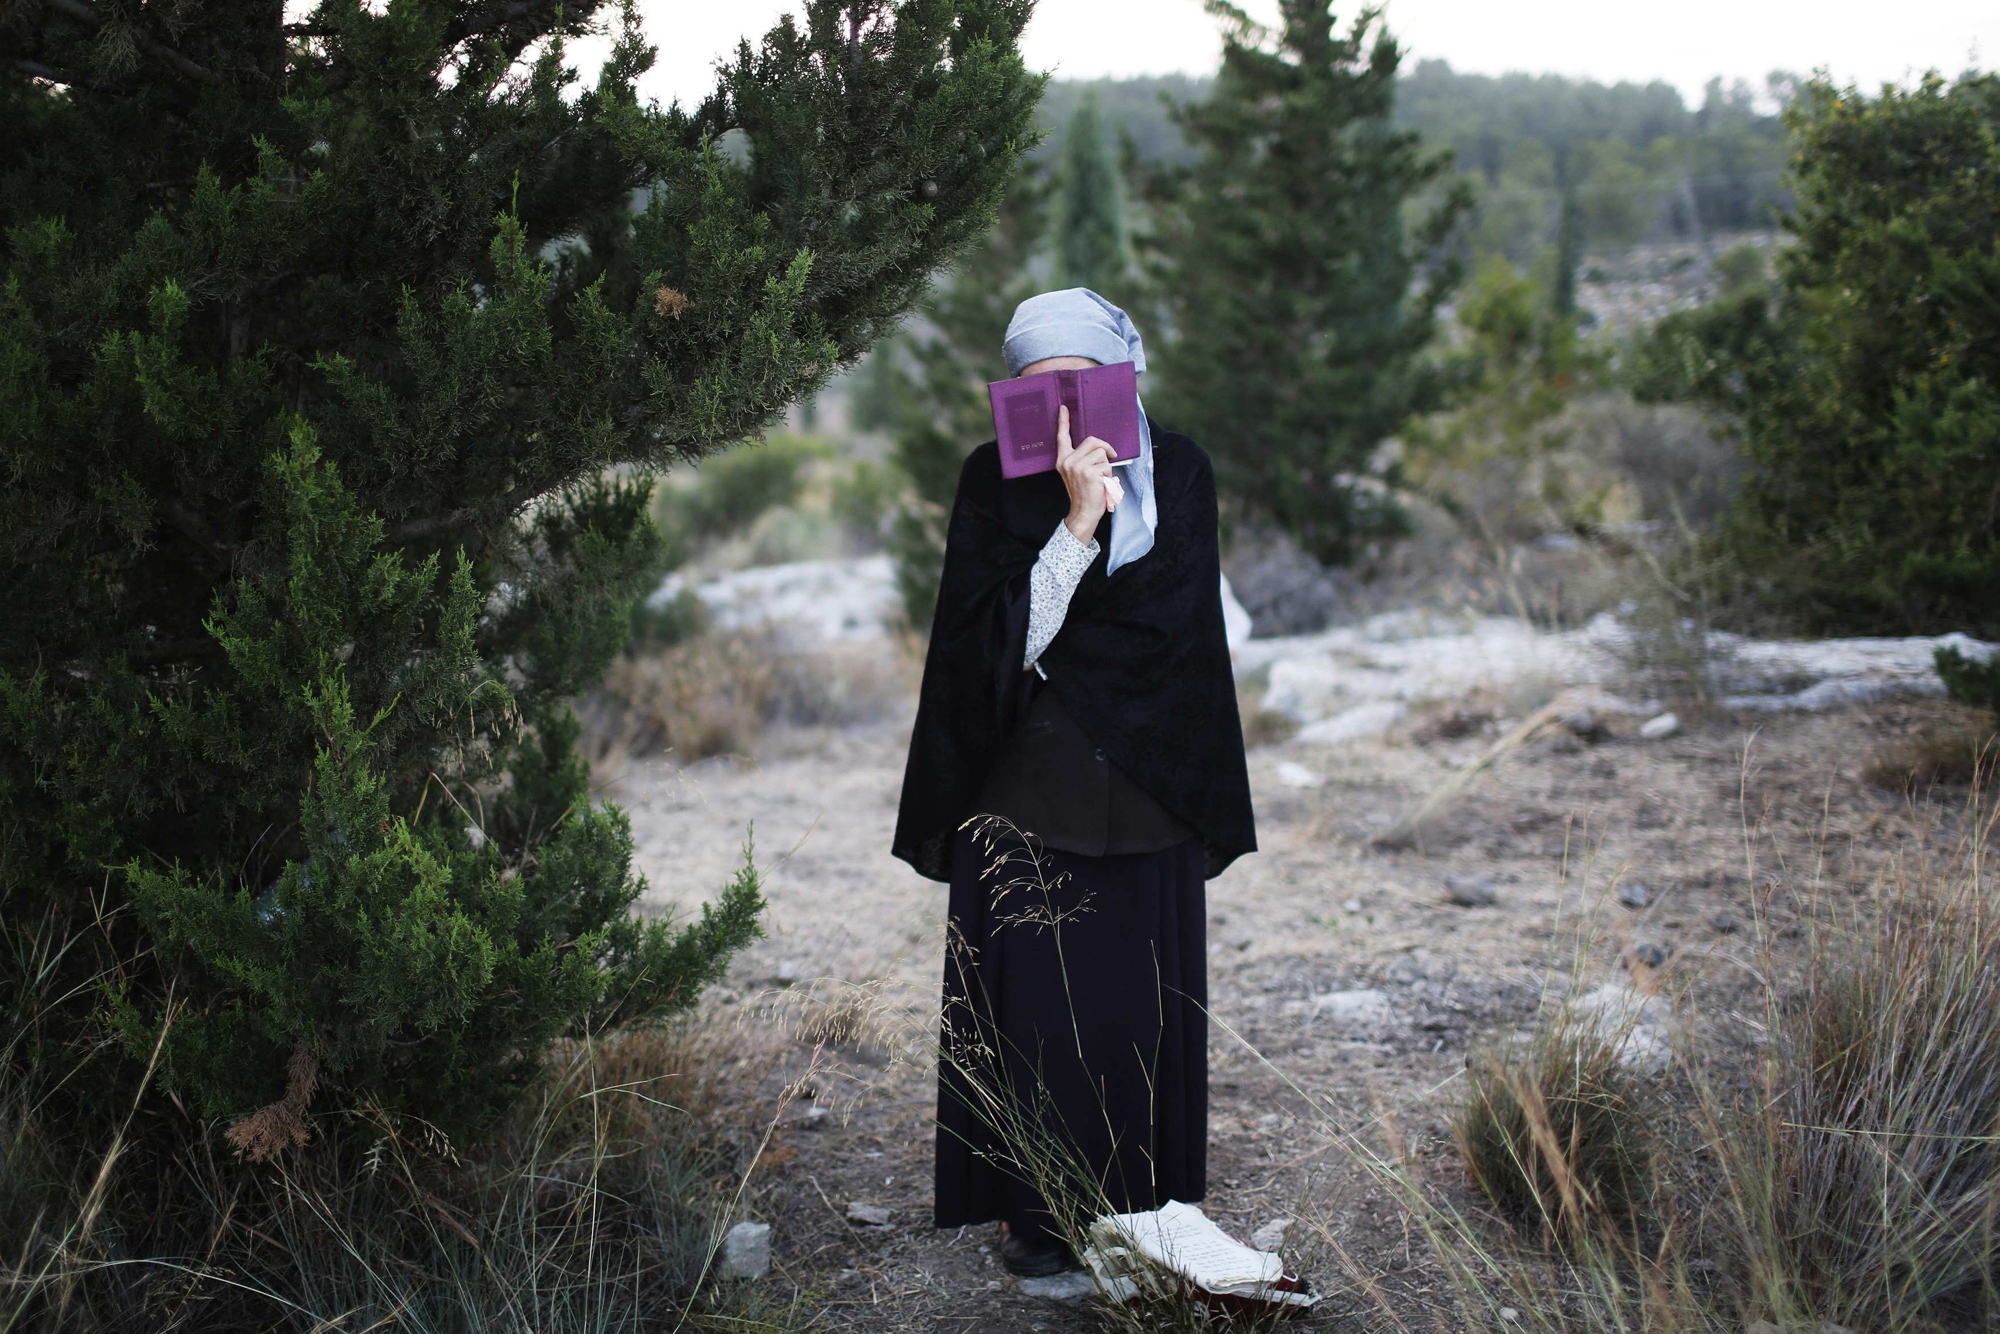 A Jewish woman prays during the joint funeral of the three Israeli teens who were abducted and killed in the occupied West Bank, in the Israeli city of Modi'in July 1.